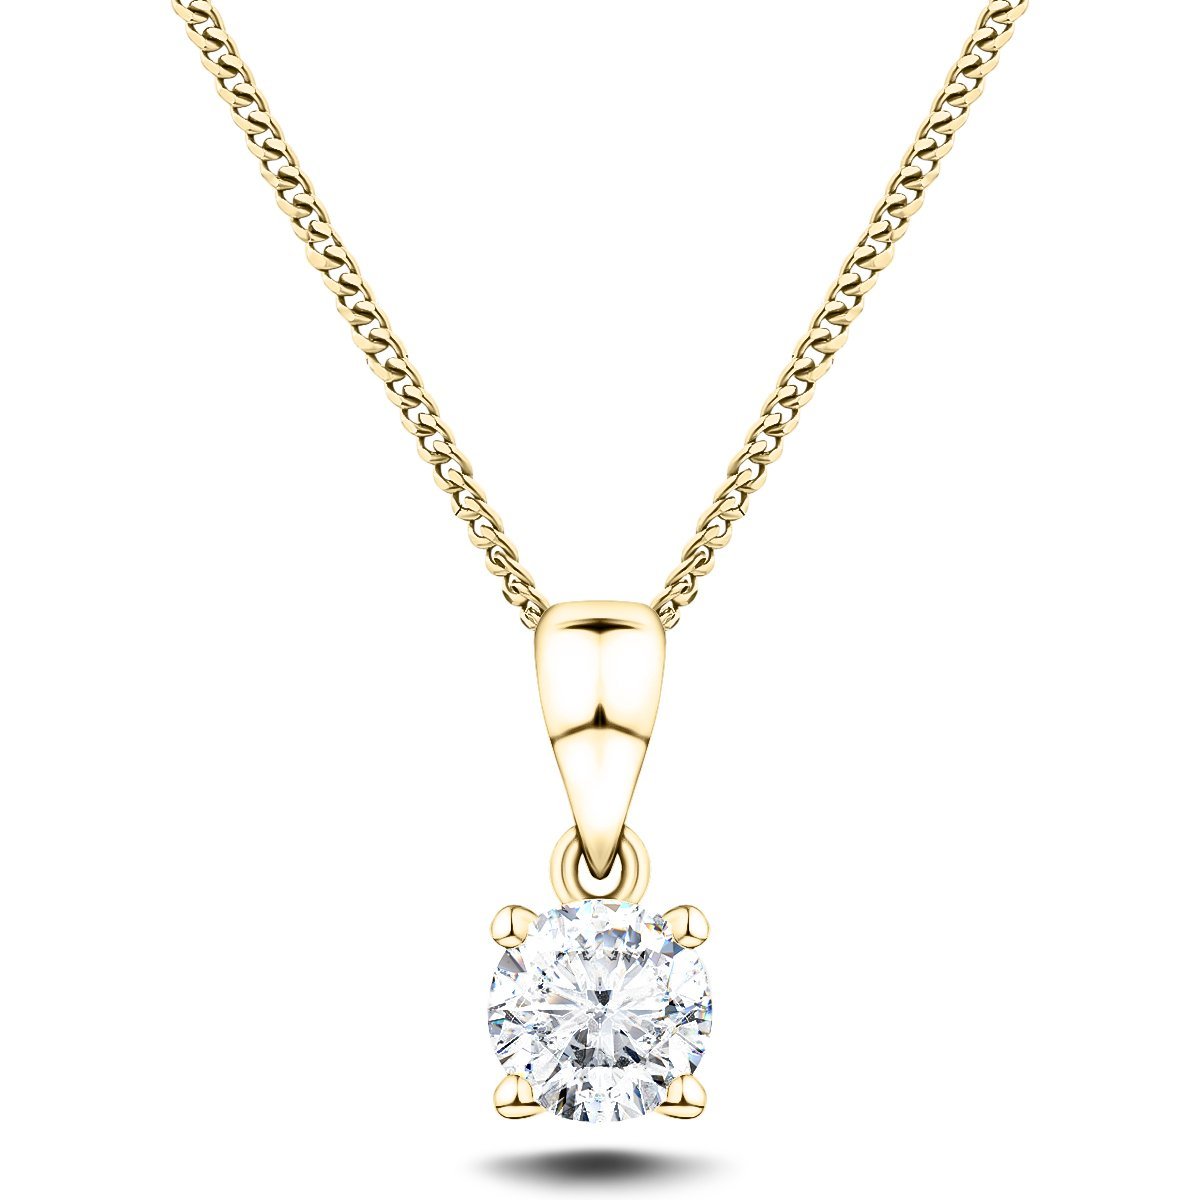 Diamond Solitaire Necklace 0.60ct G/SI in 18k Yellow Gold - All Diamond